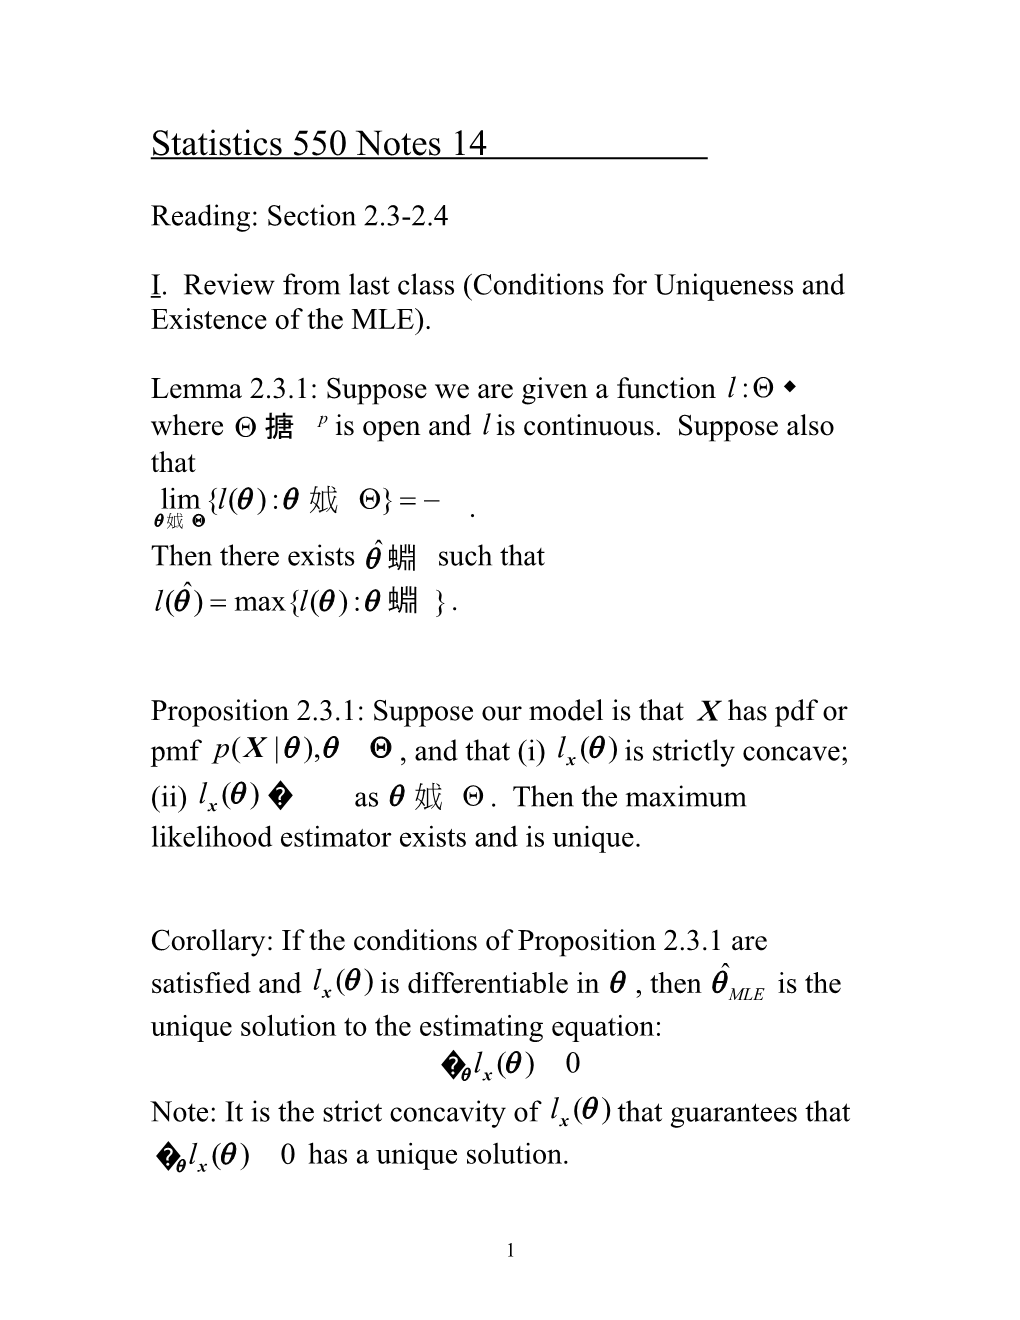 I. Review from Last Class (Conditions for Uniqueness and Existence of the MLE)